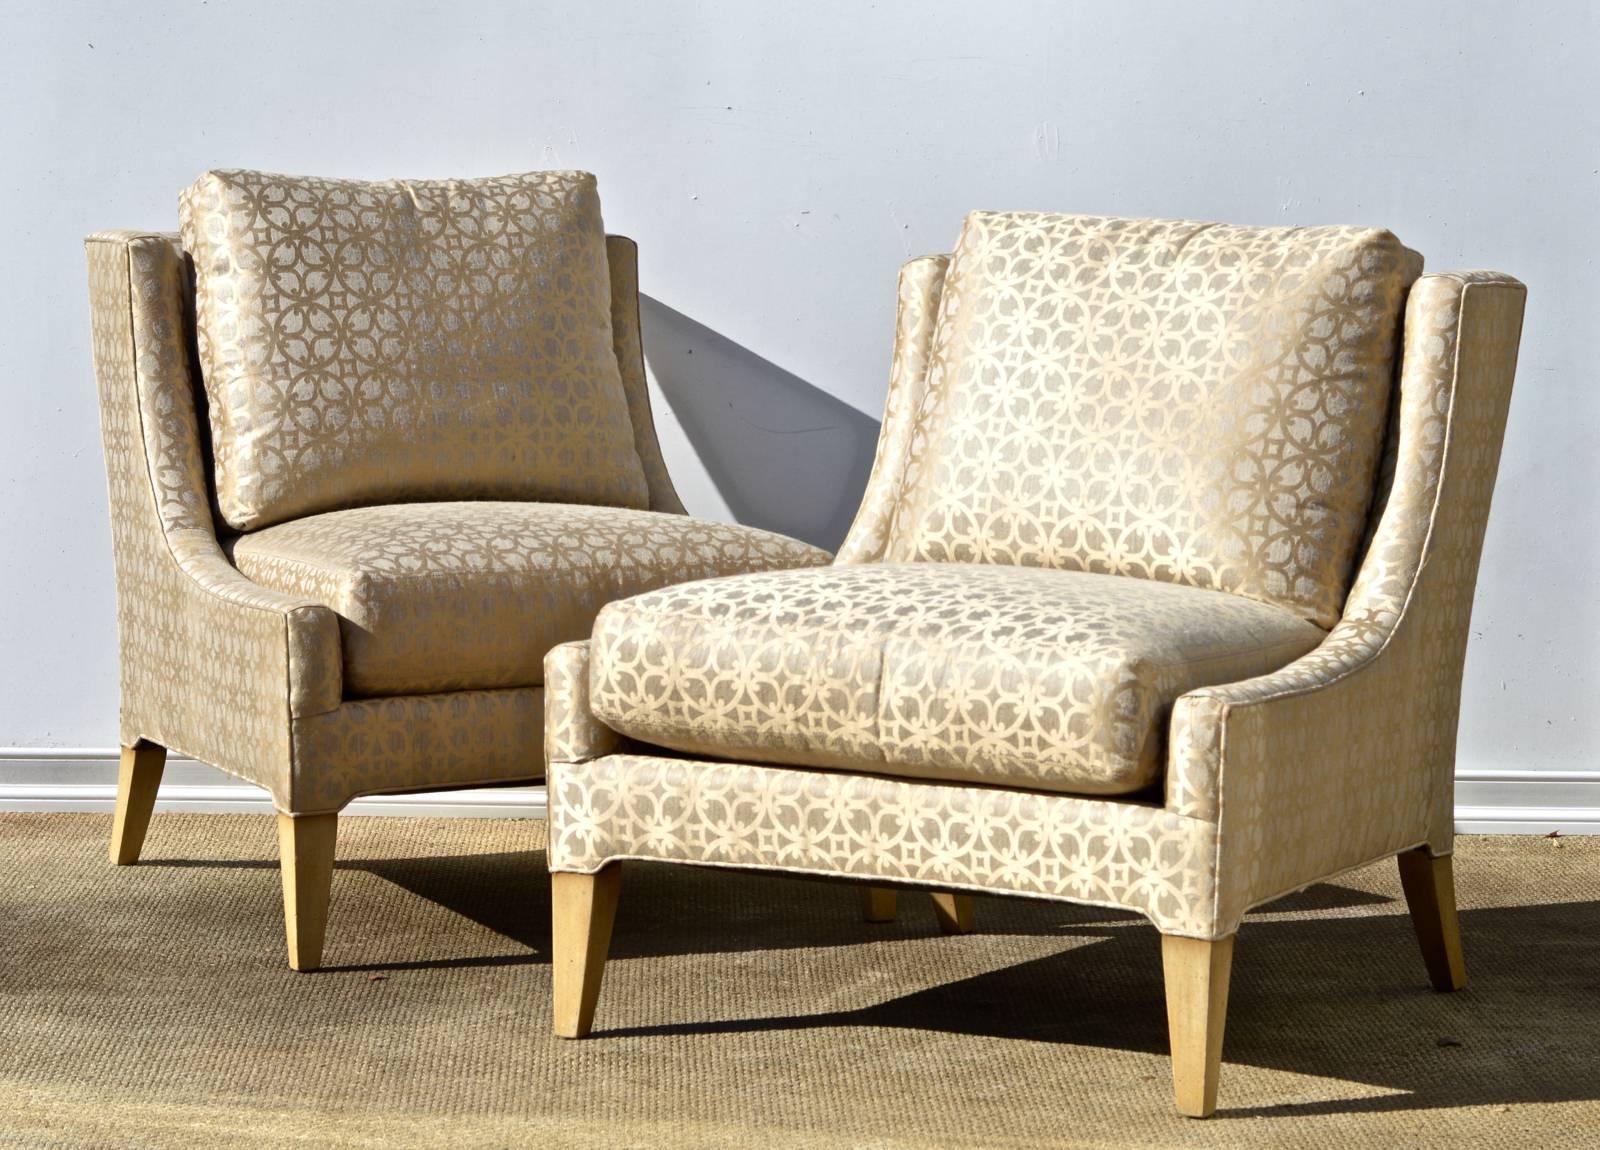 Stunning pair of oversized slipper chairs in a silk / linen blended quatre'foil fabric. Plush and overstuffed loose cushions on the seat and the back provide very cozy seating. Made by esteemed Ferguson Copeland Ltd.